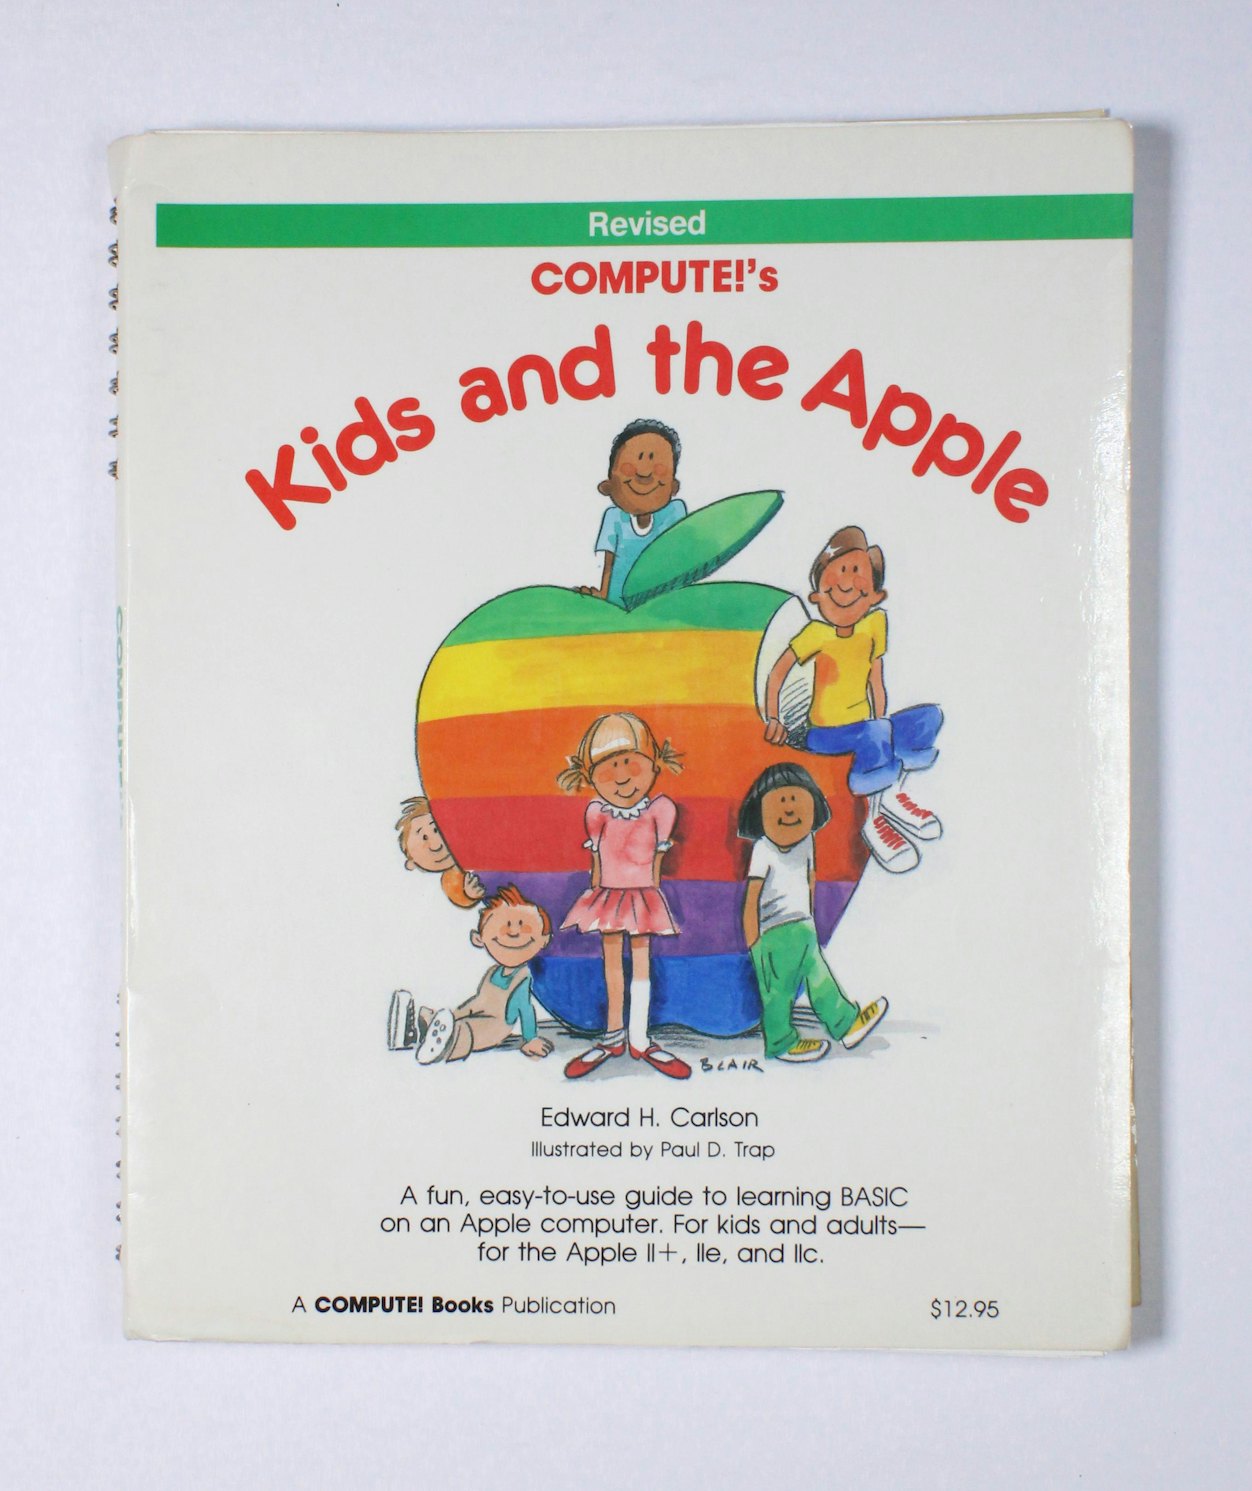 COMPUTE!'S Kids and the Apple